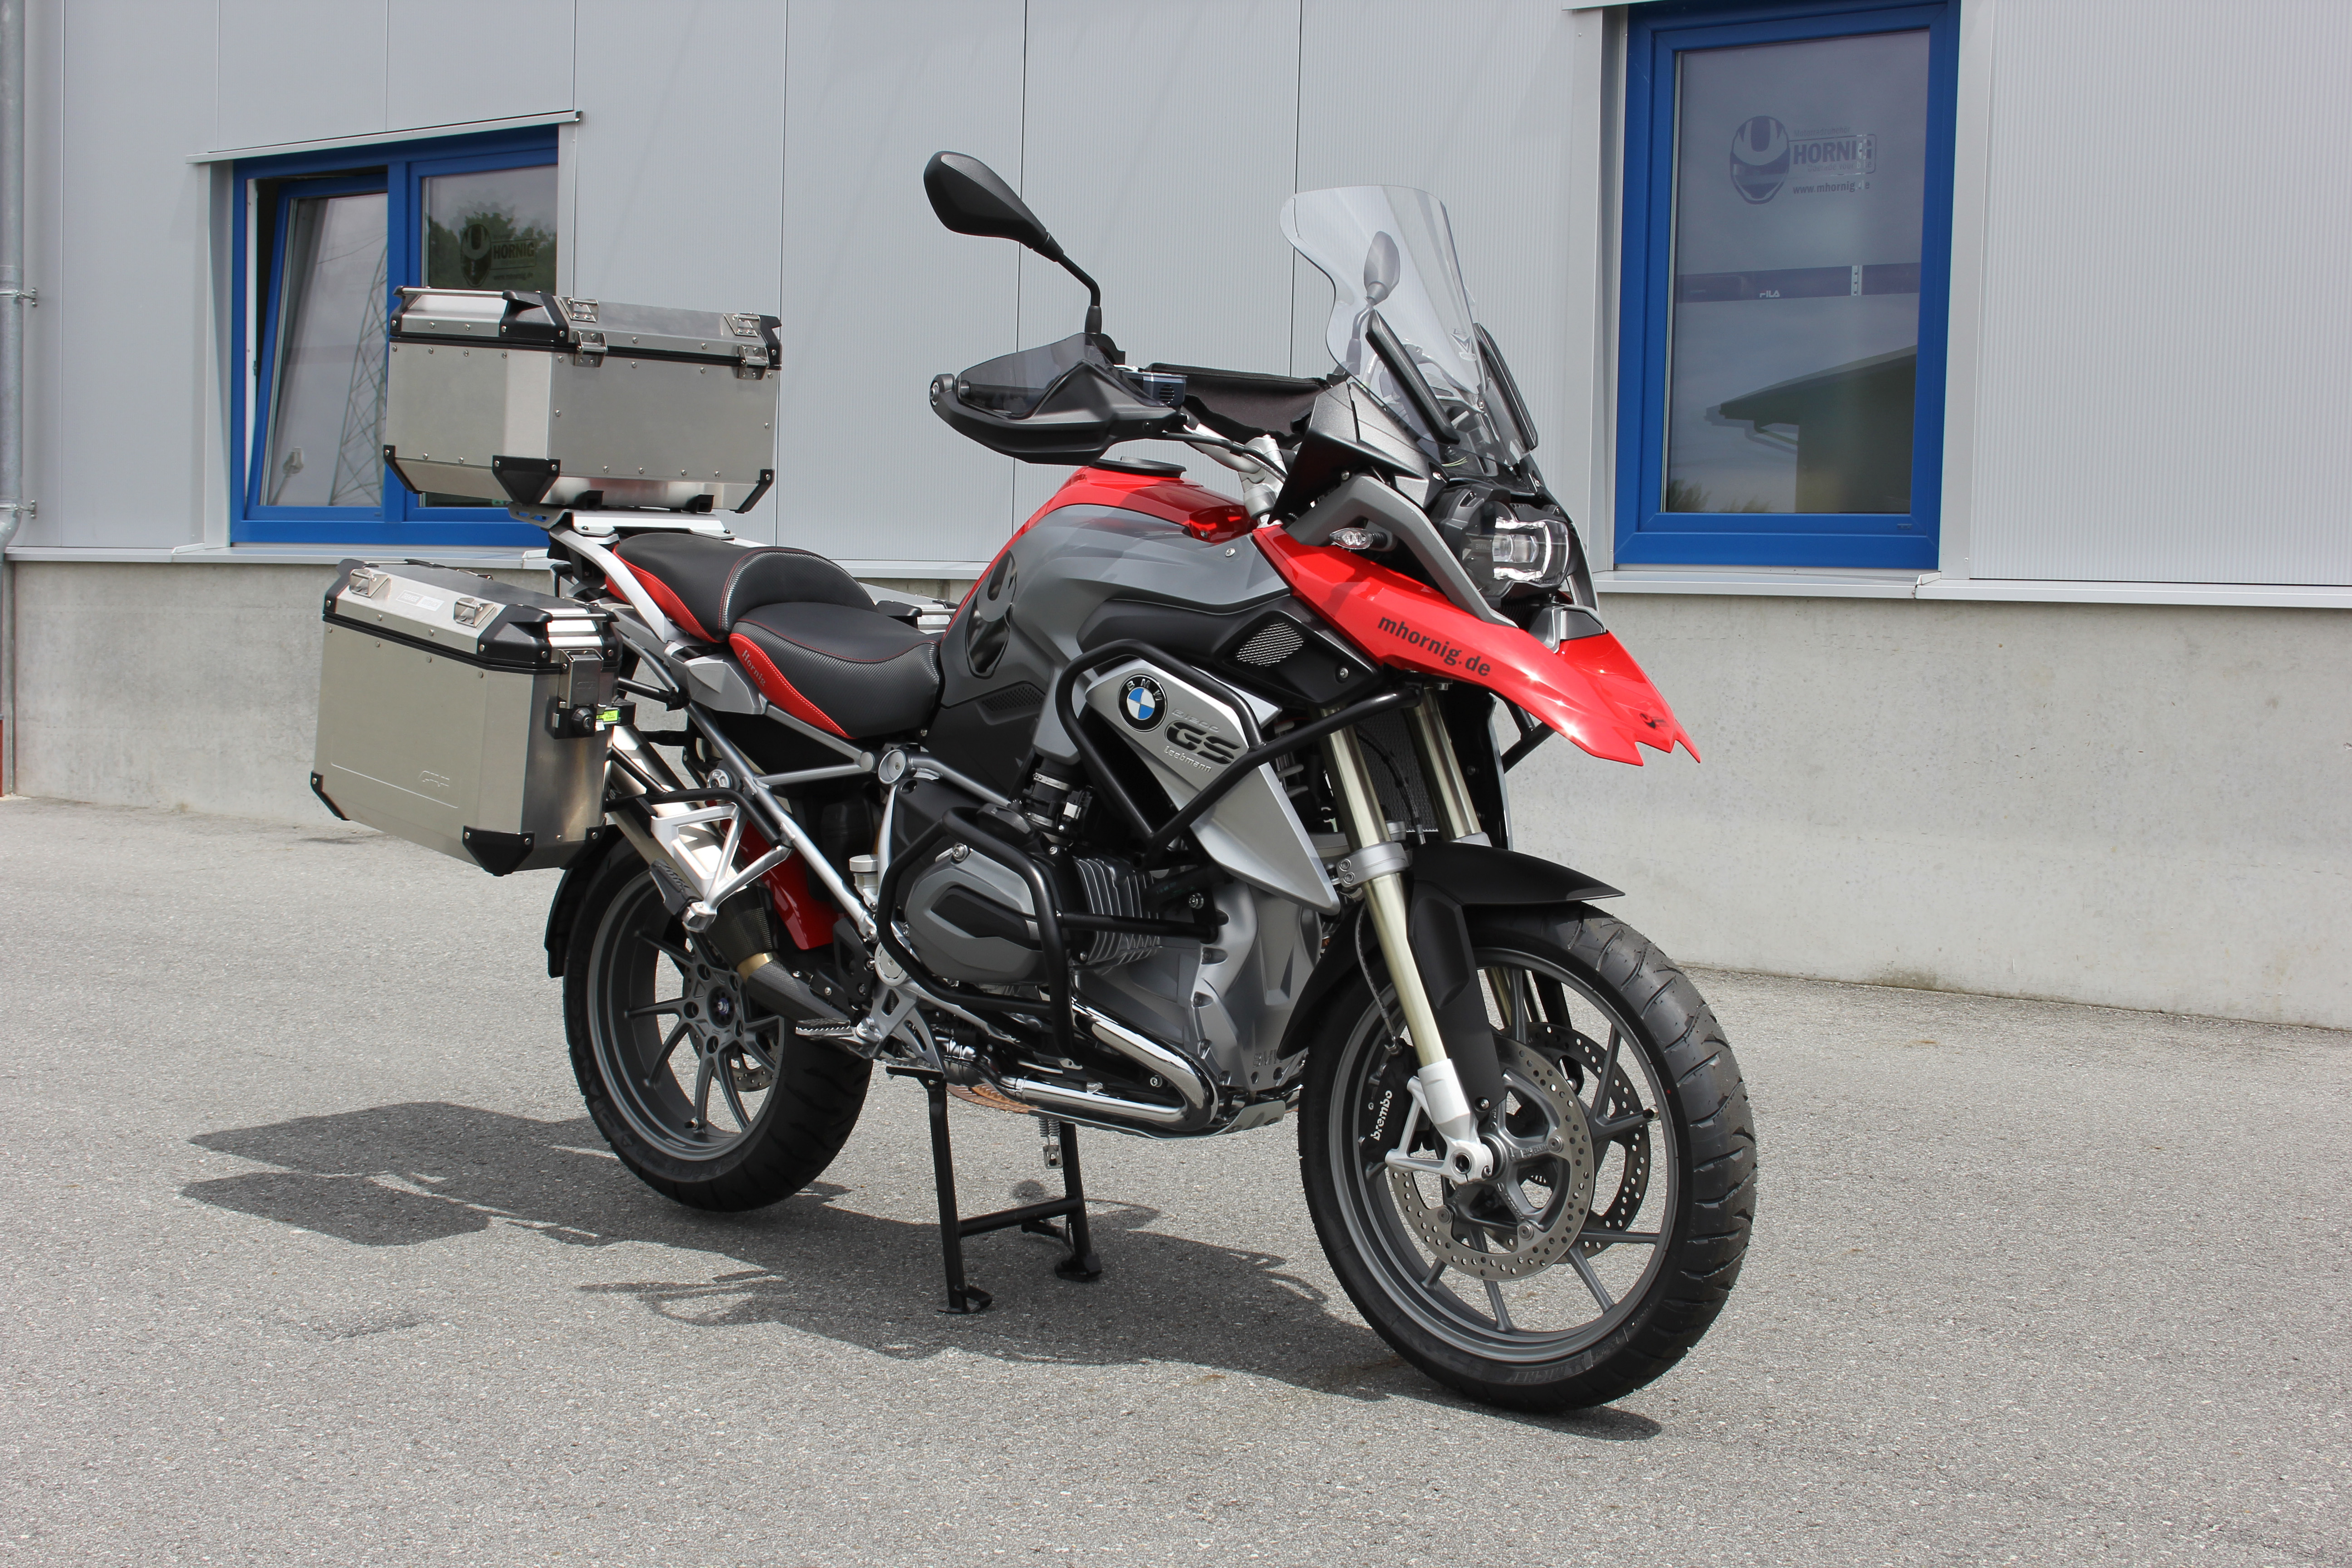 BMW R1200GS LC (2016) conversion by Hornig with more